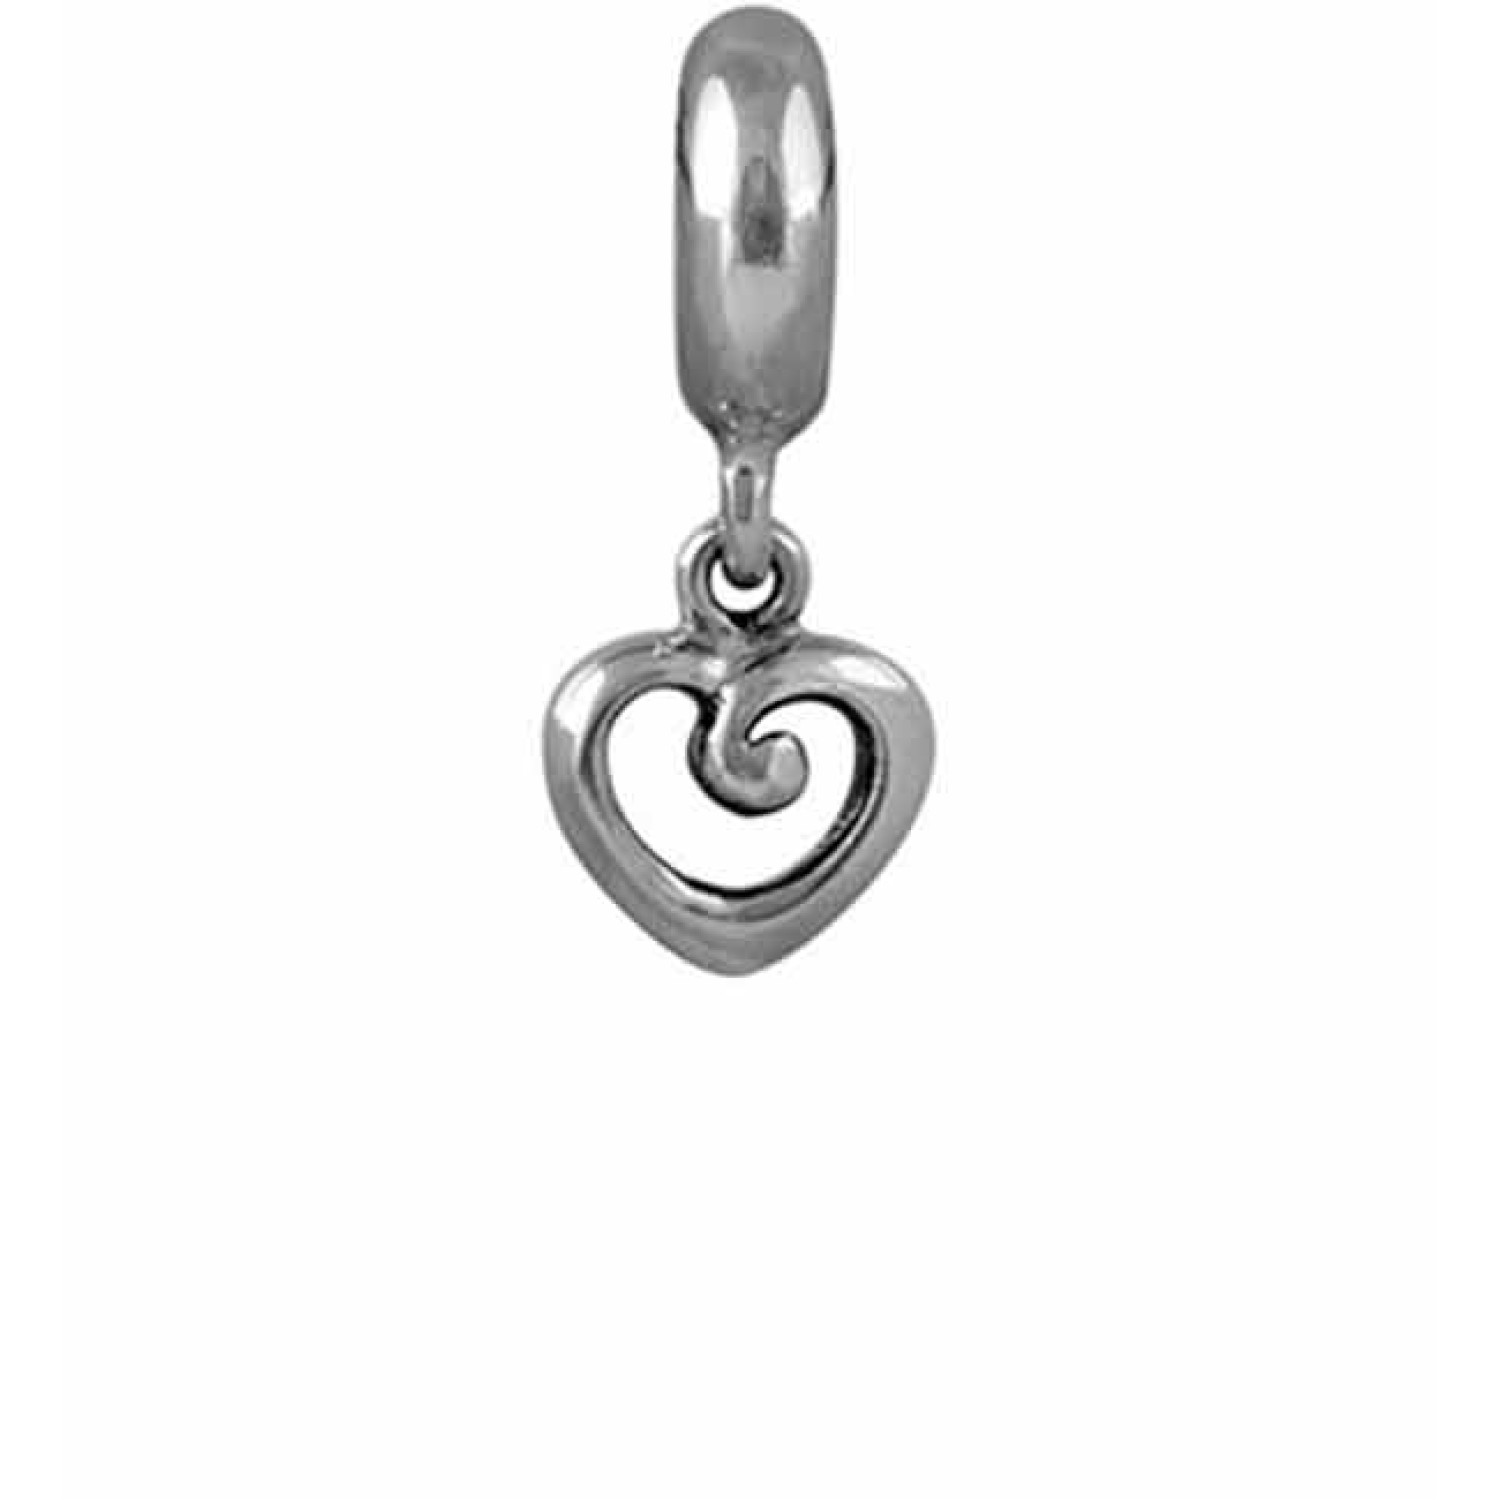 LKD012 Evolve Charms Heart of NZ. Our beautiful Heart of NZ charm is a symbol of endearment, celebrating the deep bonds we share with those we love. The combination of the heart, signifying love, and the koru, representing new beginnings, hope and w @chri